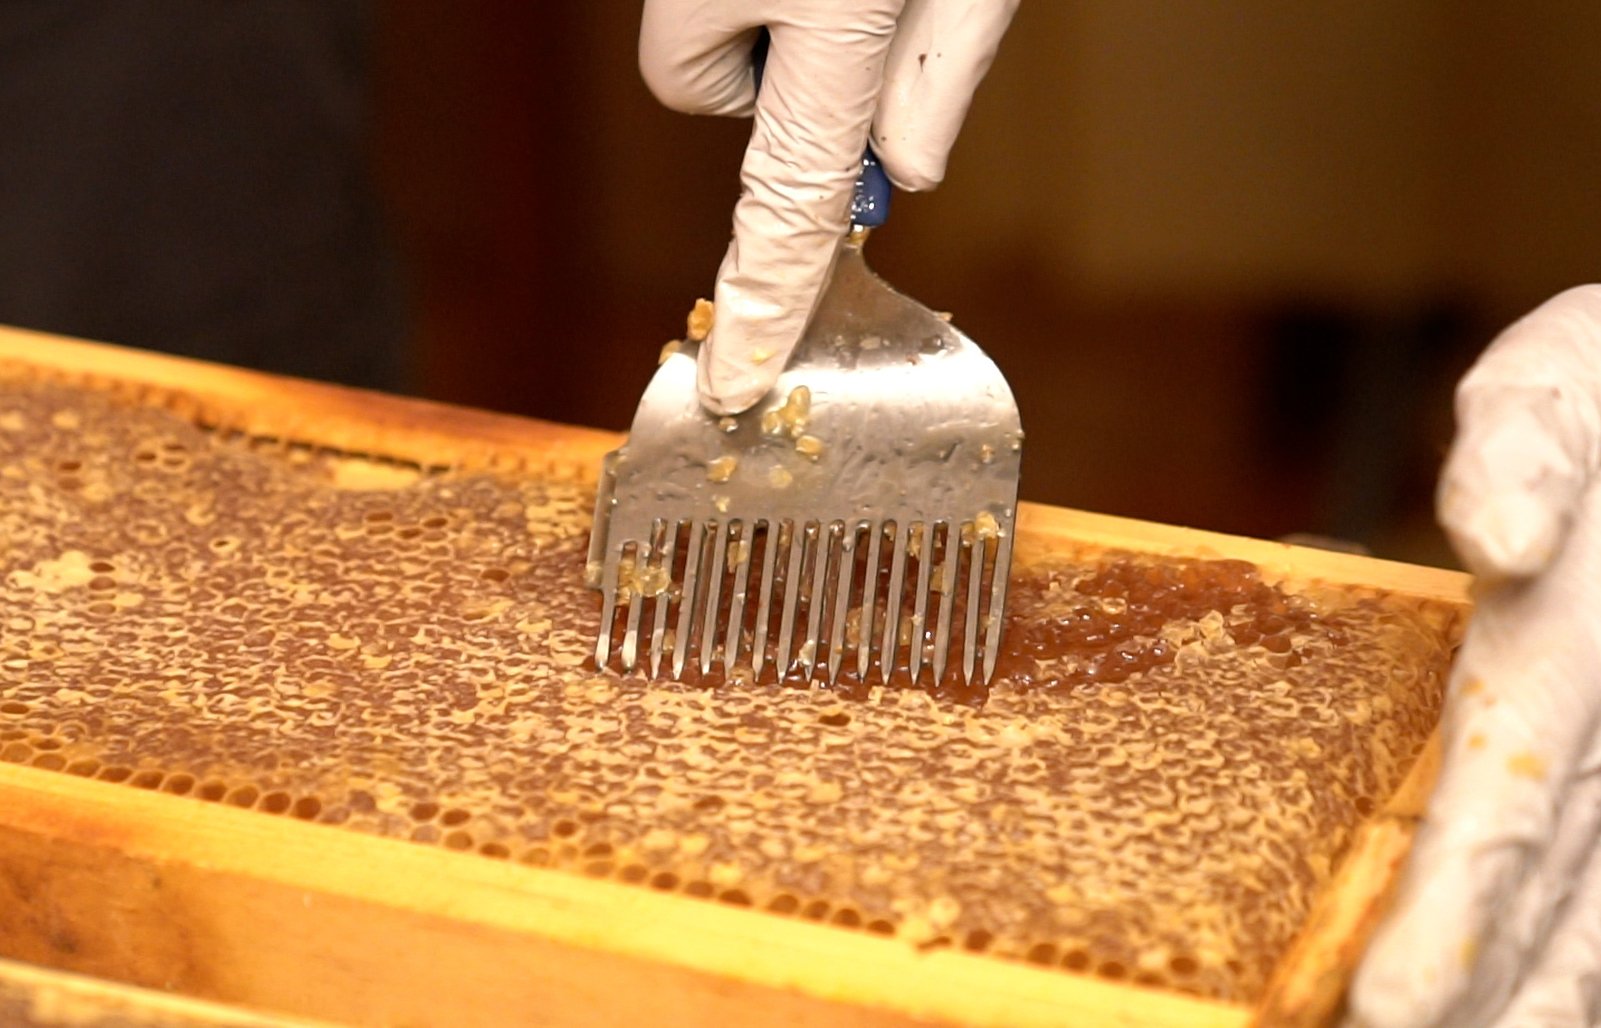 VIDEO: Honey Soon for Sale at Congressional Cemetery